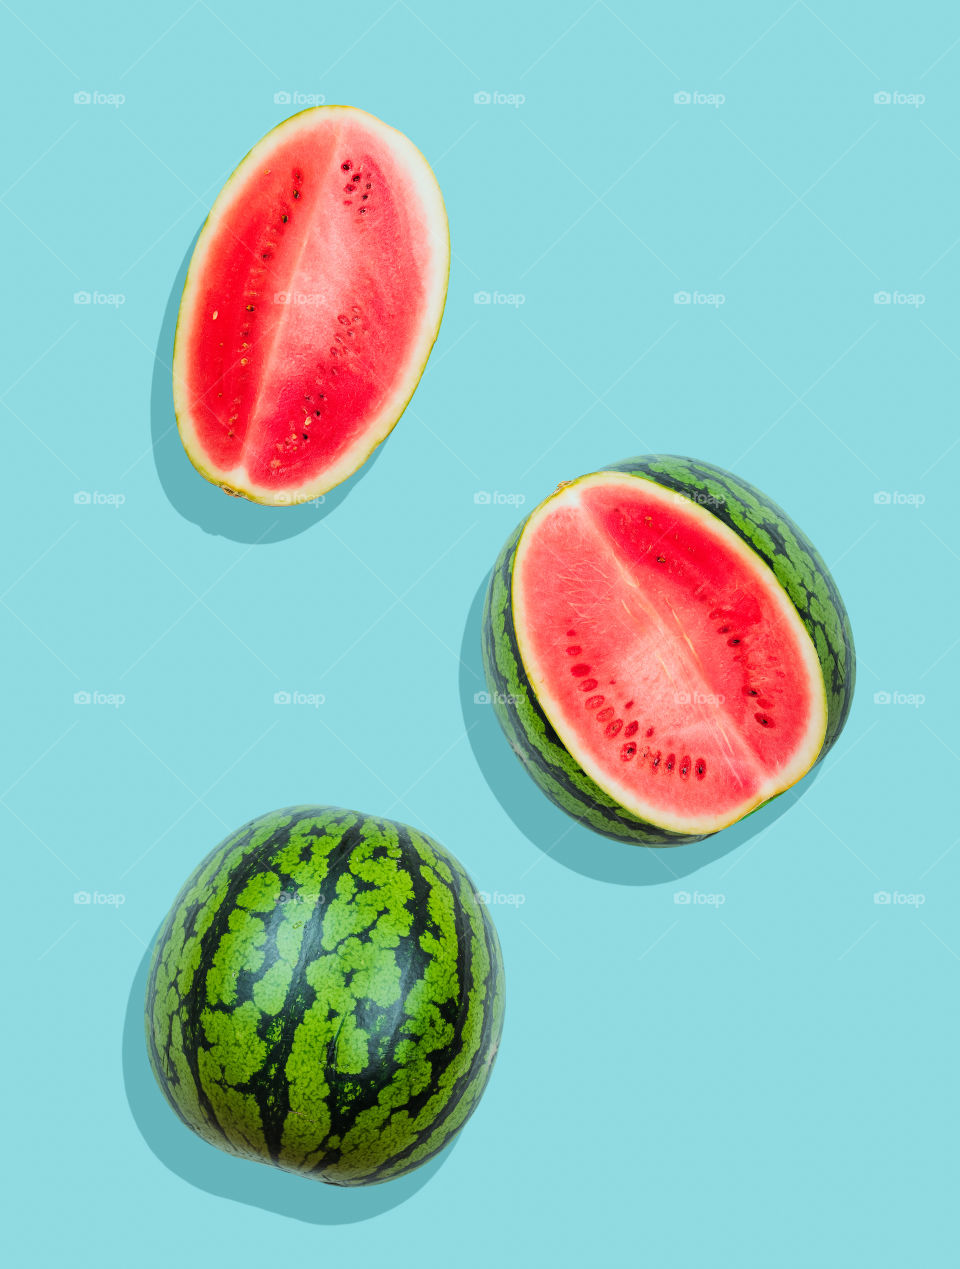 Pieces of watermelon on plain blue background